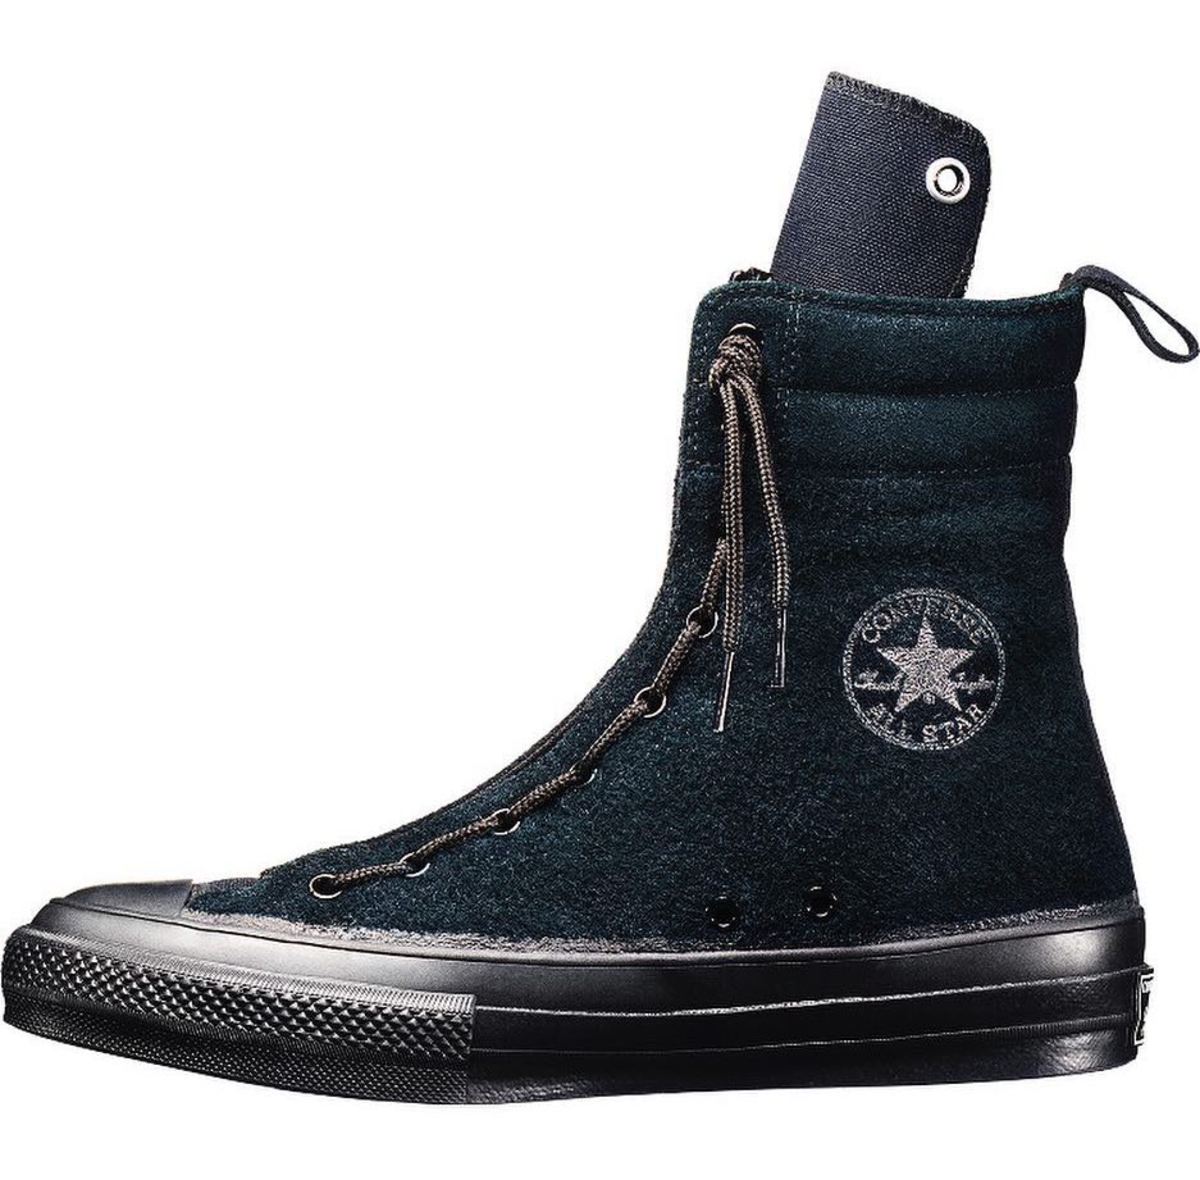 N.Hollywood releases a Chuck Taylor for Converse Japan's Addict 